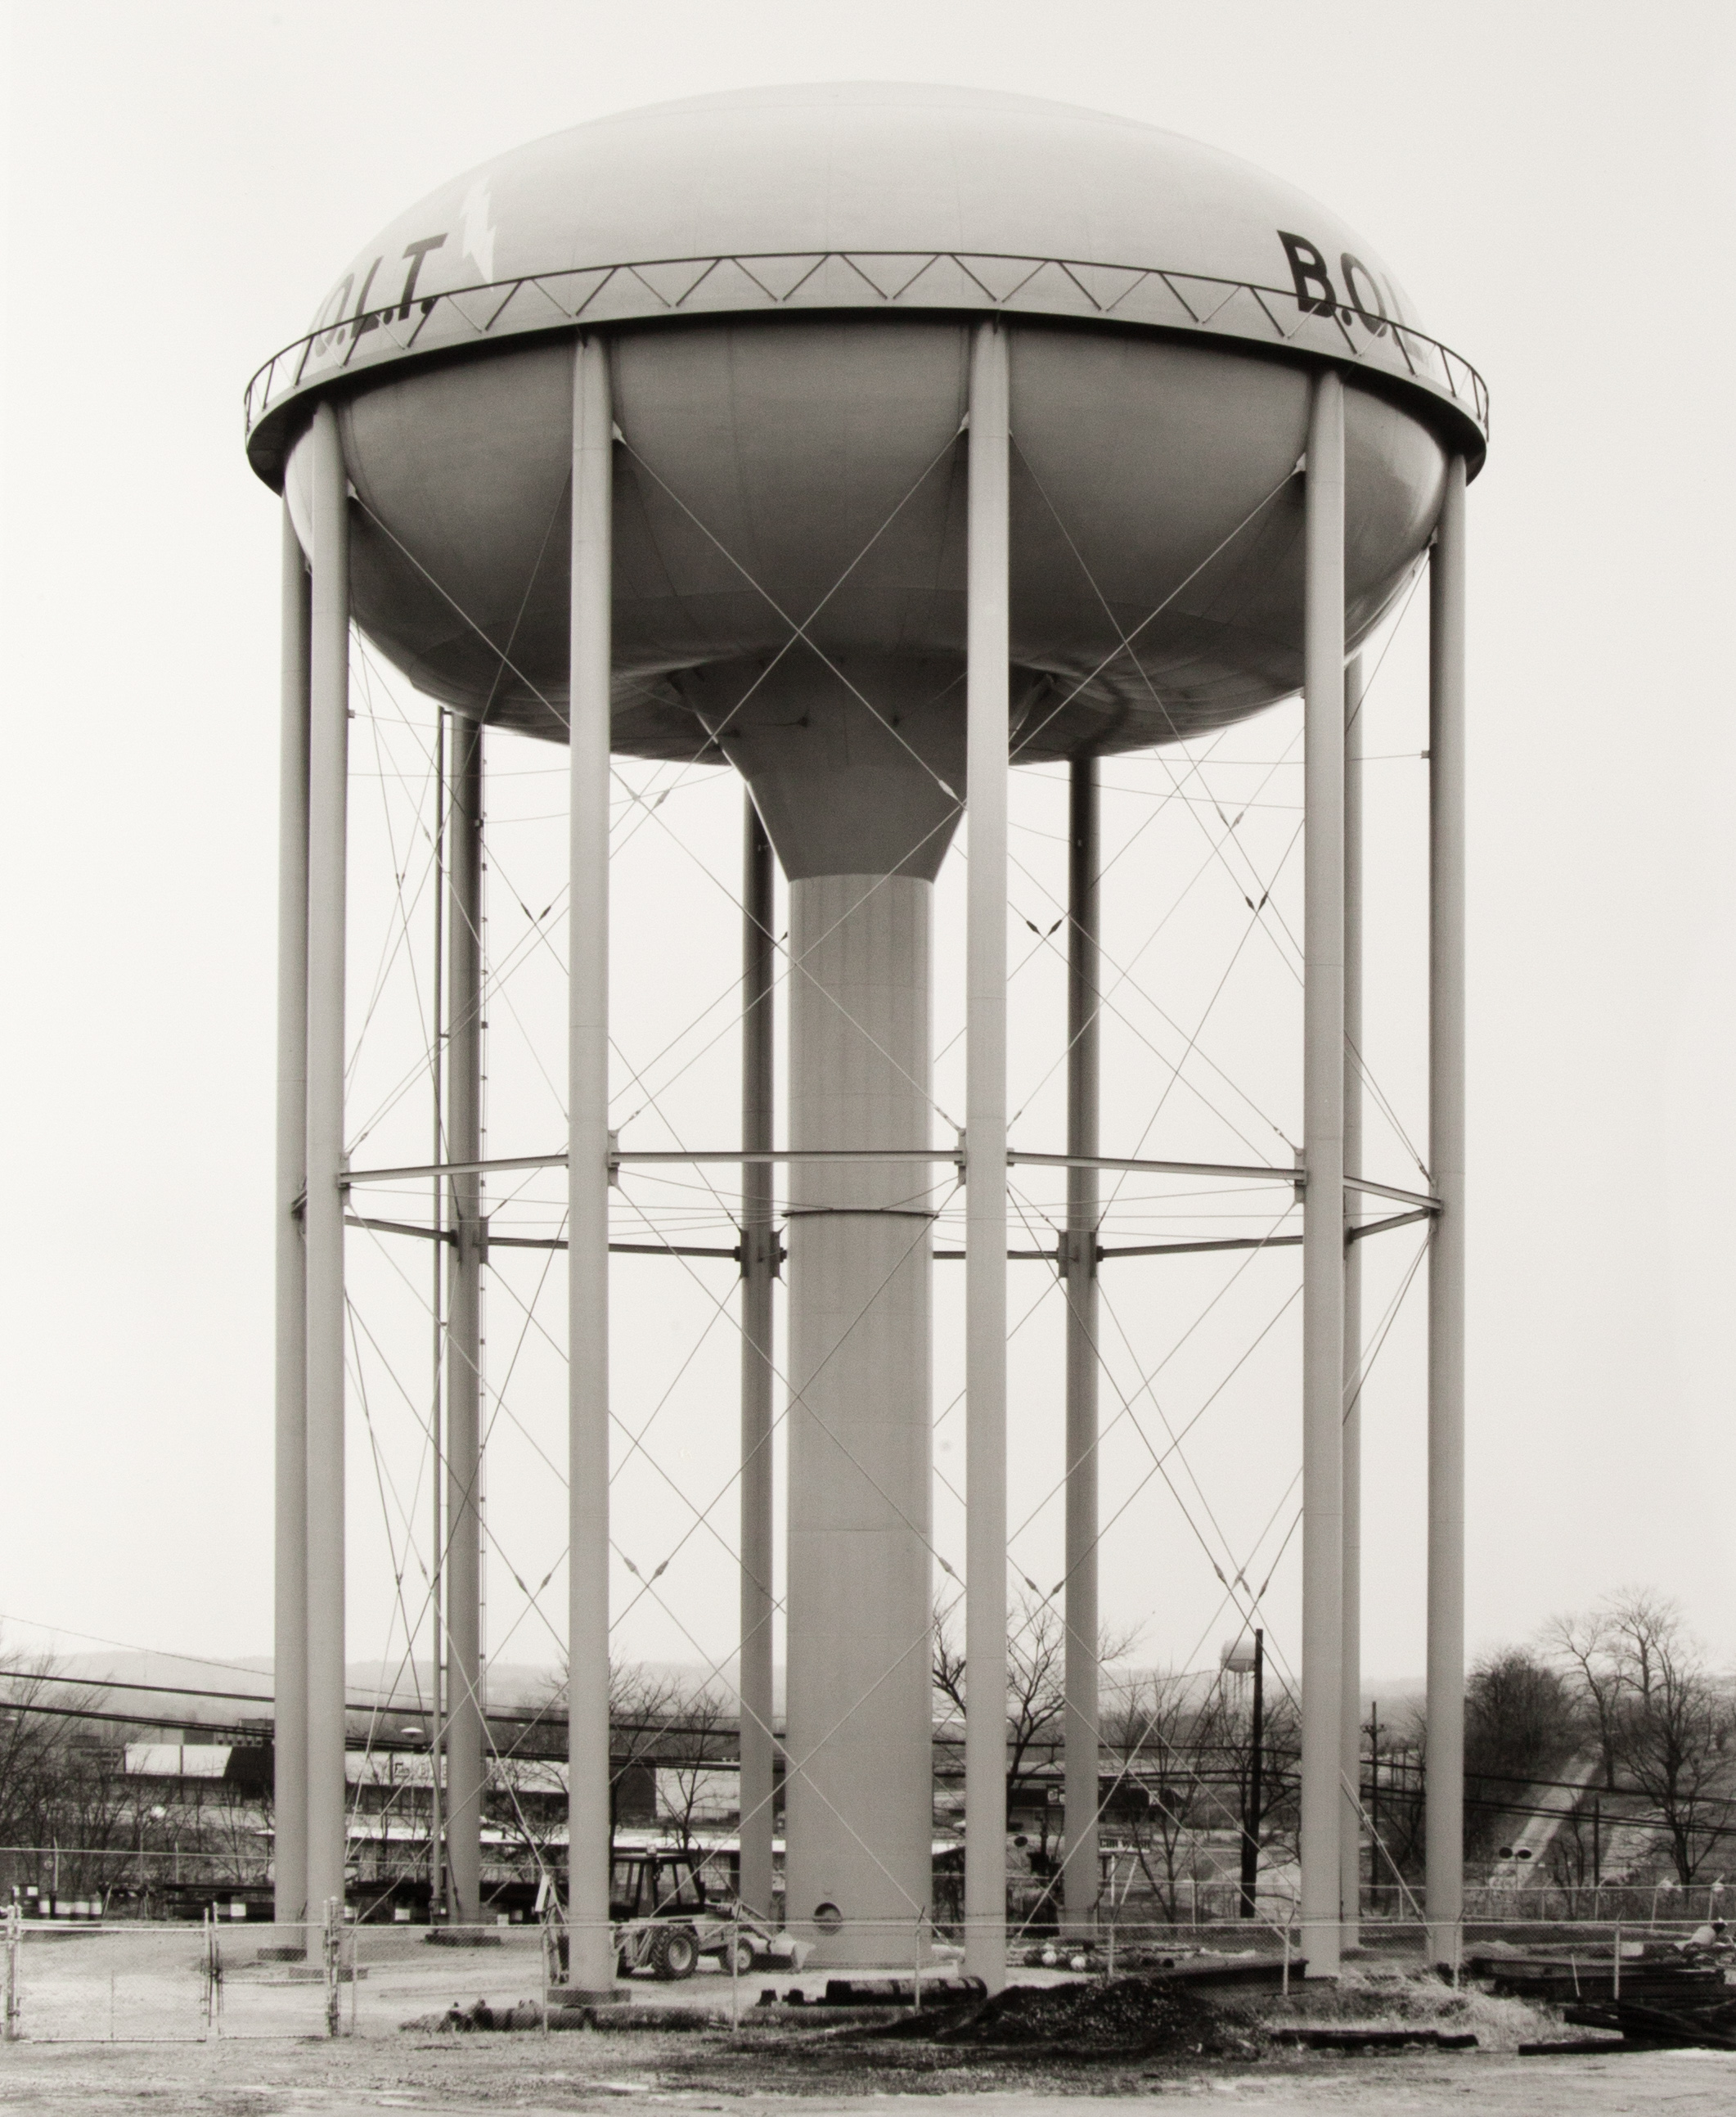 Black and white photograph of a water tower